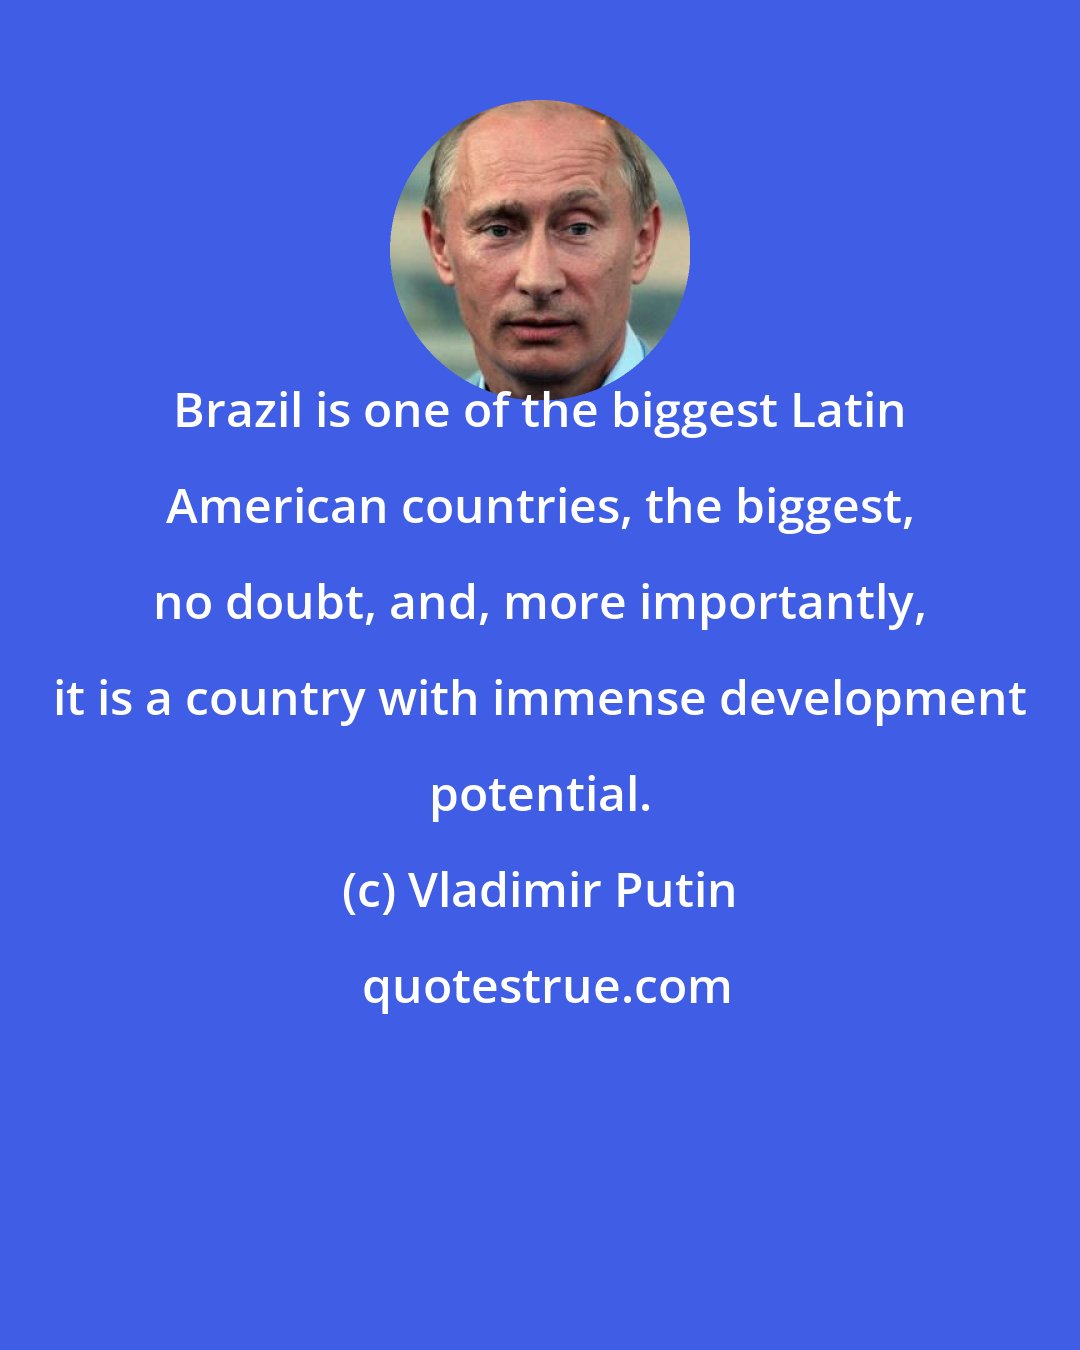 Vladimir Putin: Brazil is one of the biggest Latin American countries, the biggest, no doubt, and, more importantly, it is a country with immense development potential.